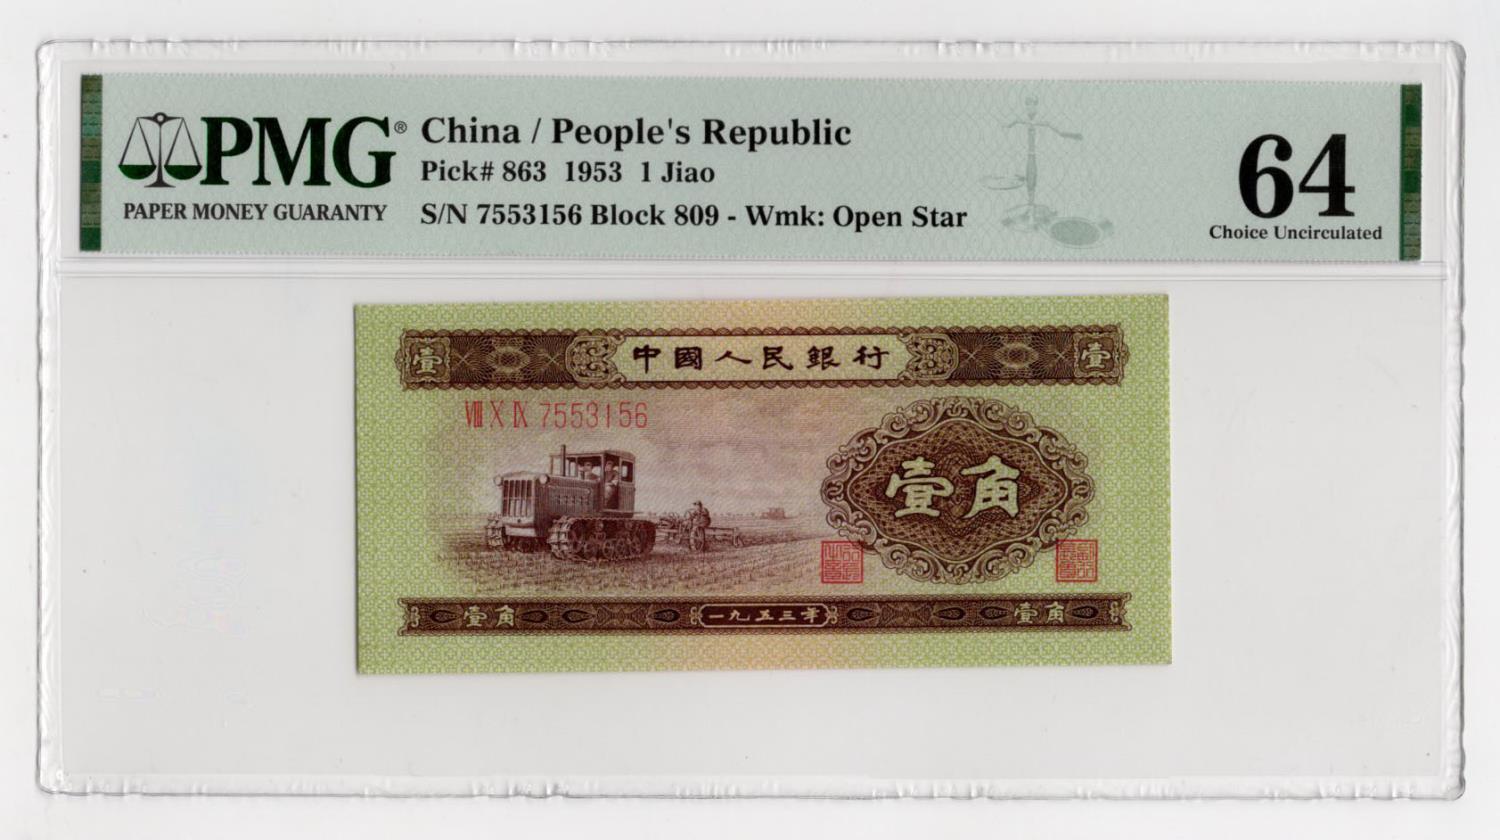 China Peoples Republic 1 Jiao dated 1953, block number 809, serial number 7553156 (BNB B4075,